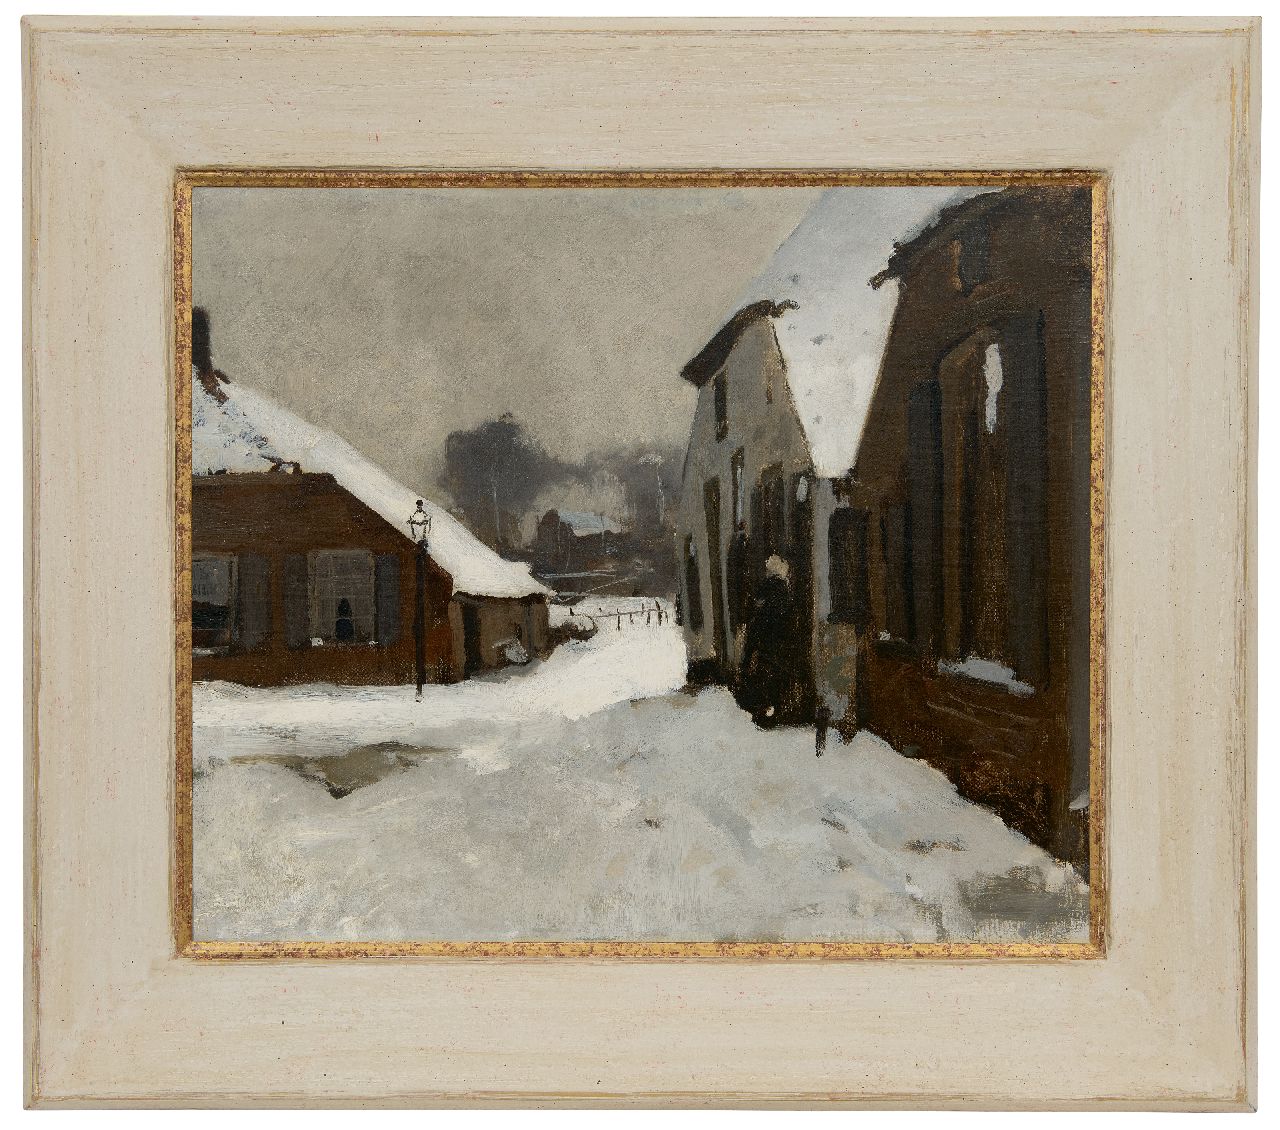 Witsen W.A.  | 'Willem' Arnold Witsen | Paintings offered for sale | Winter in Ede, oil on canvas 55.2 x 66.5 cm, painted ca. 1895-1902